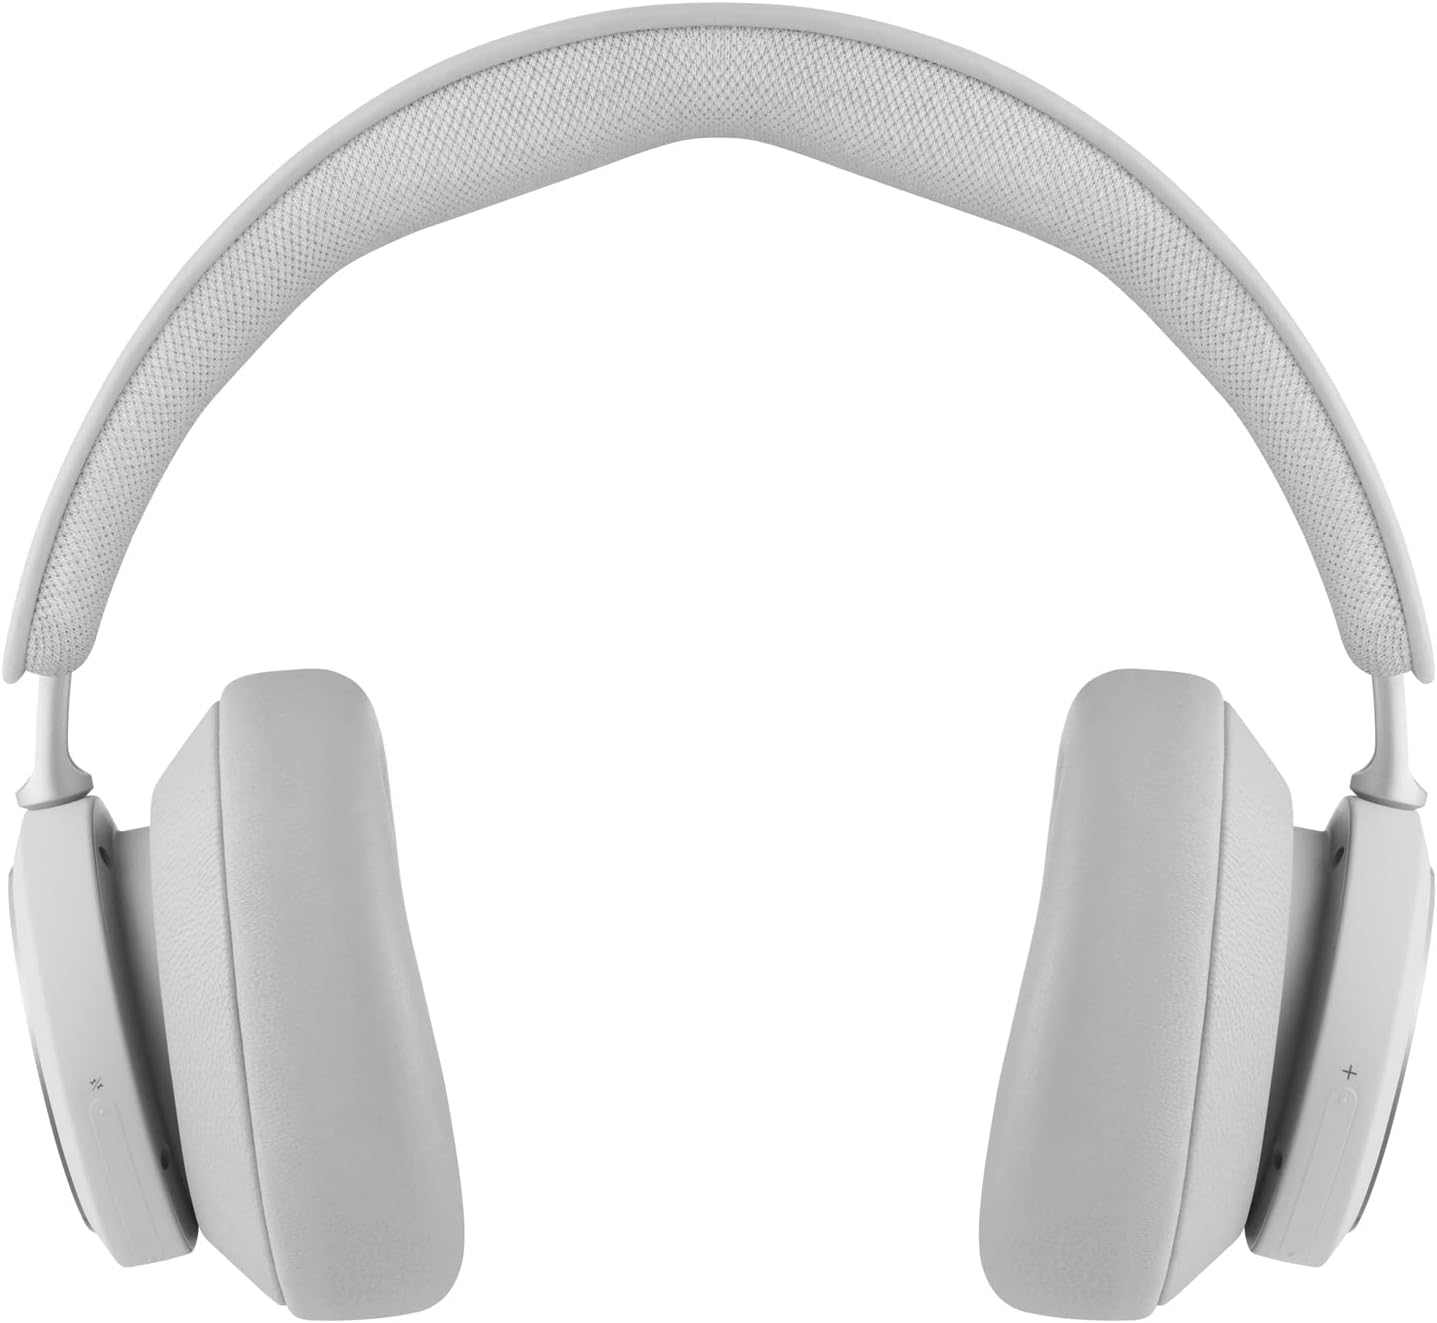 Bang & Olufsen Beoplay Portal Pc/Ps - Wireless Bluetooth Gaming Over-Ear Headphones With Active Noise Cancelling And Microphone For Pc And Playstation, Grey Mist, One Size